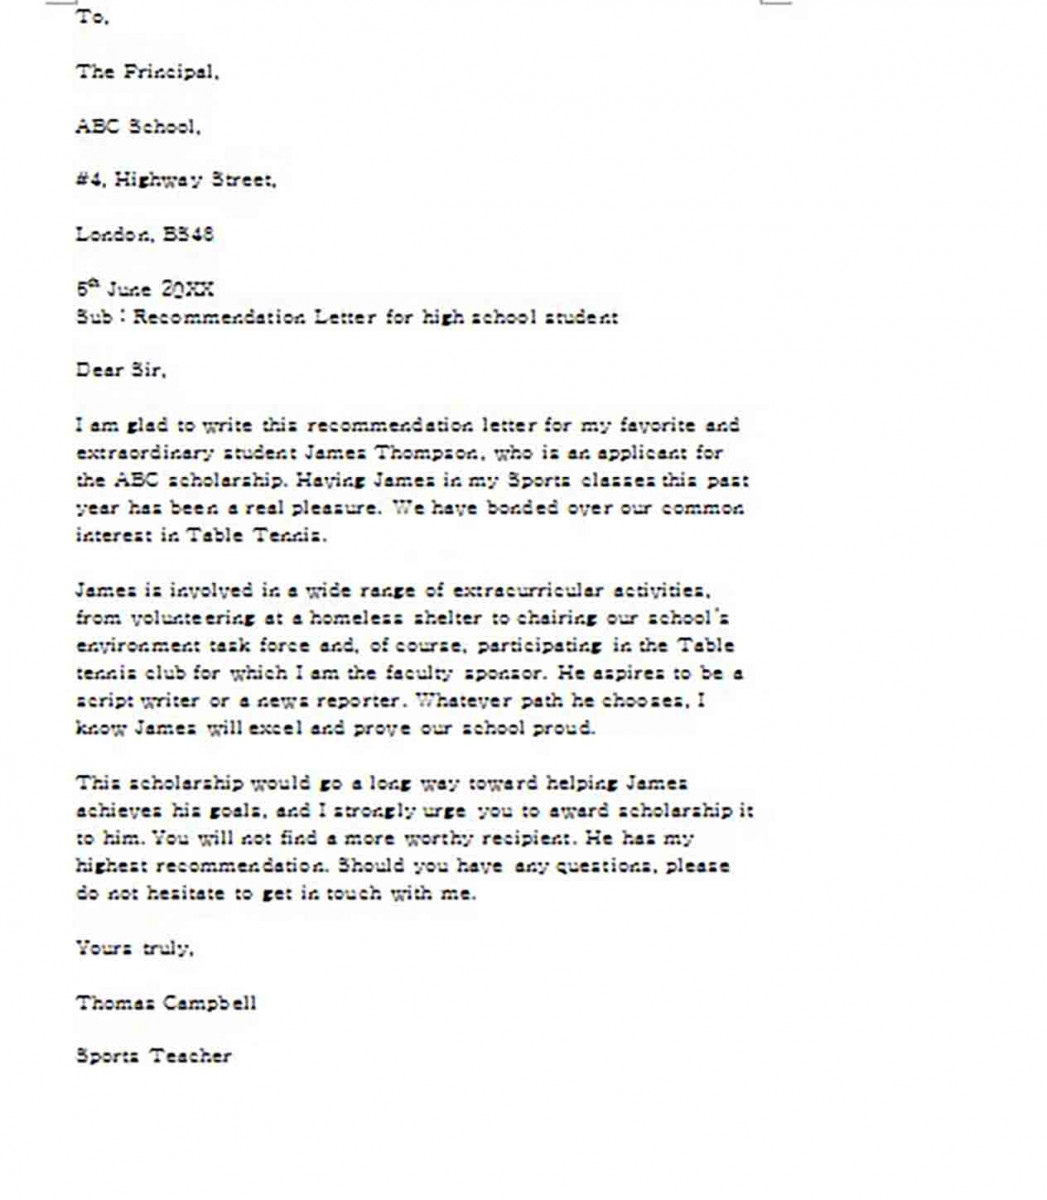 Letter of Recommendation for Teacher and How to Write a Good Document